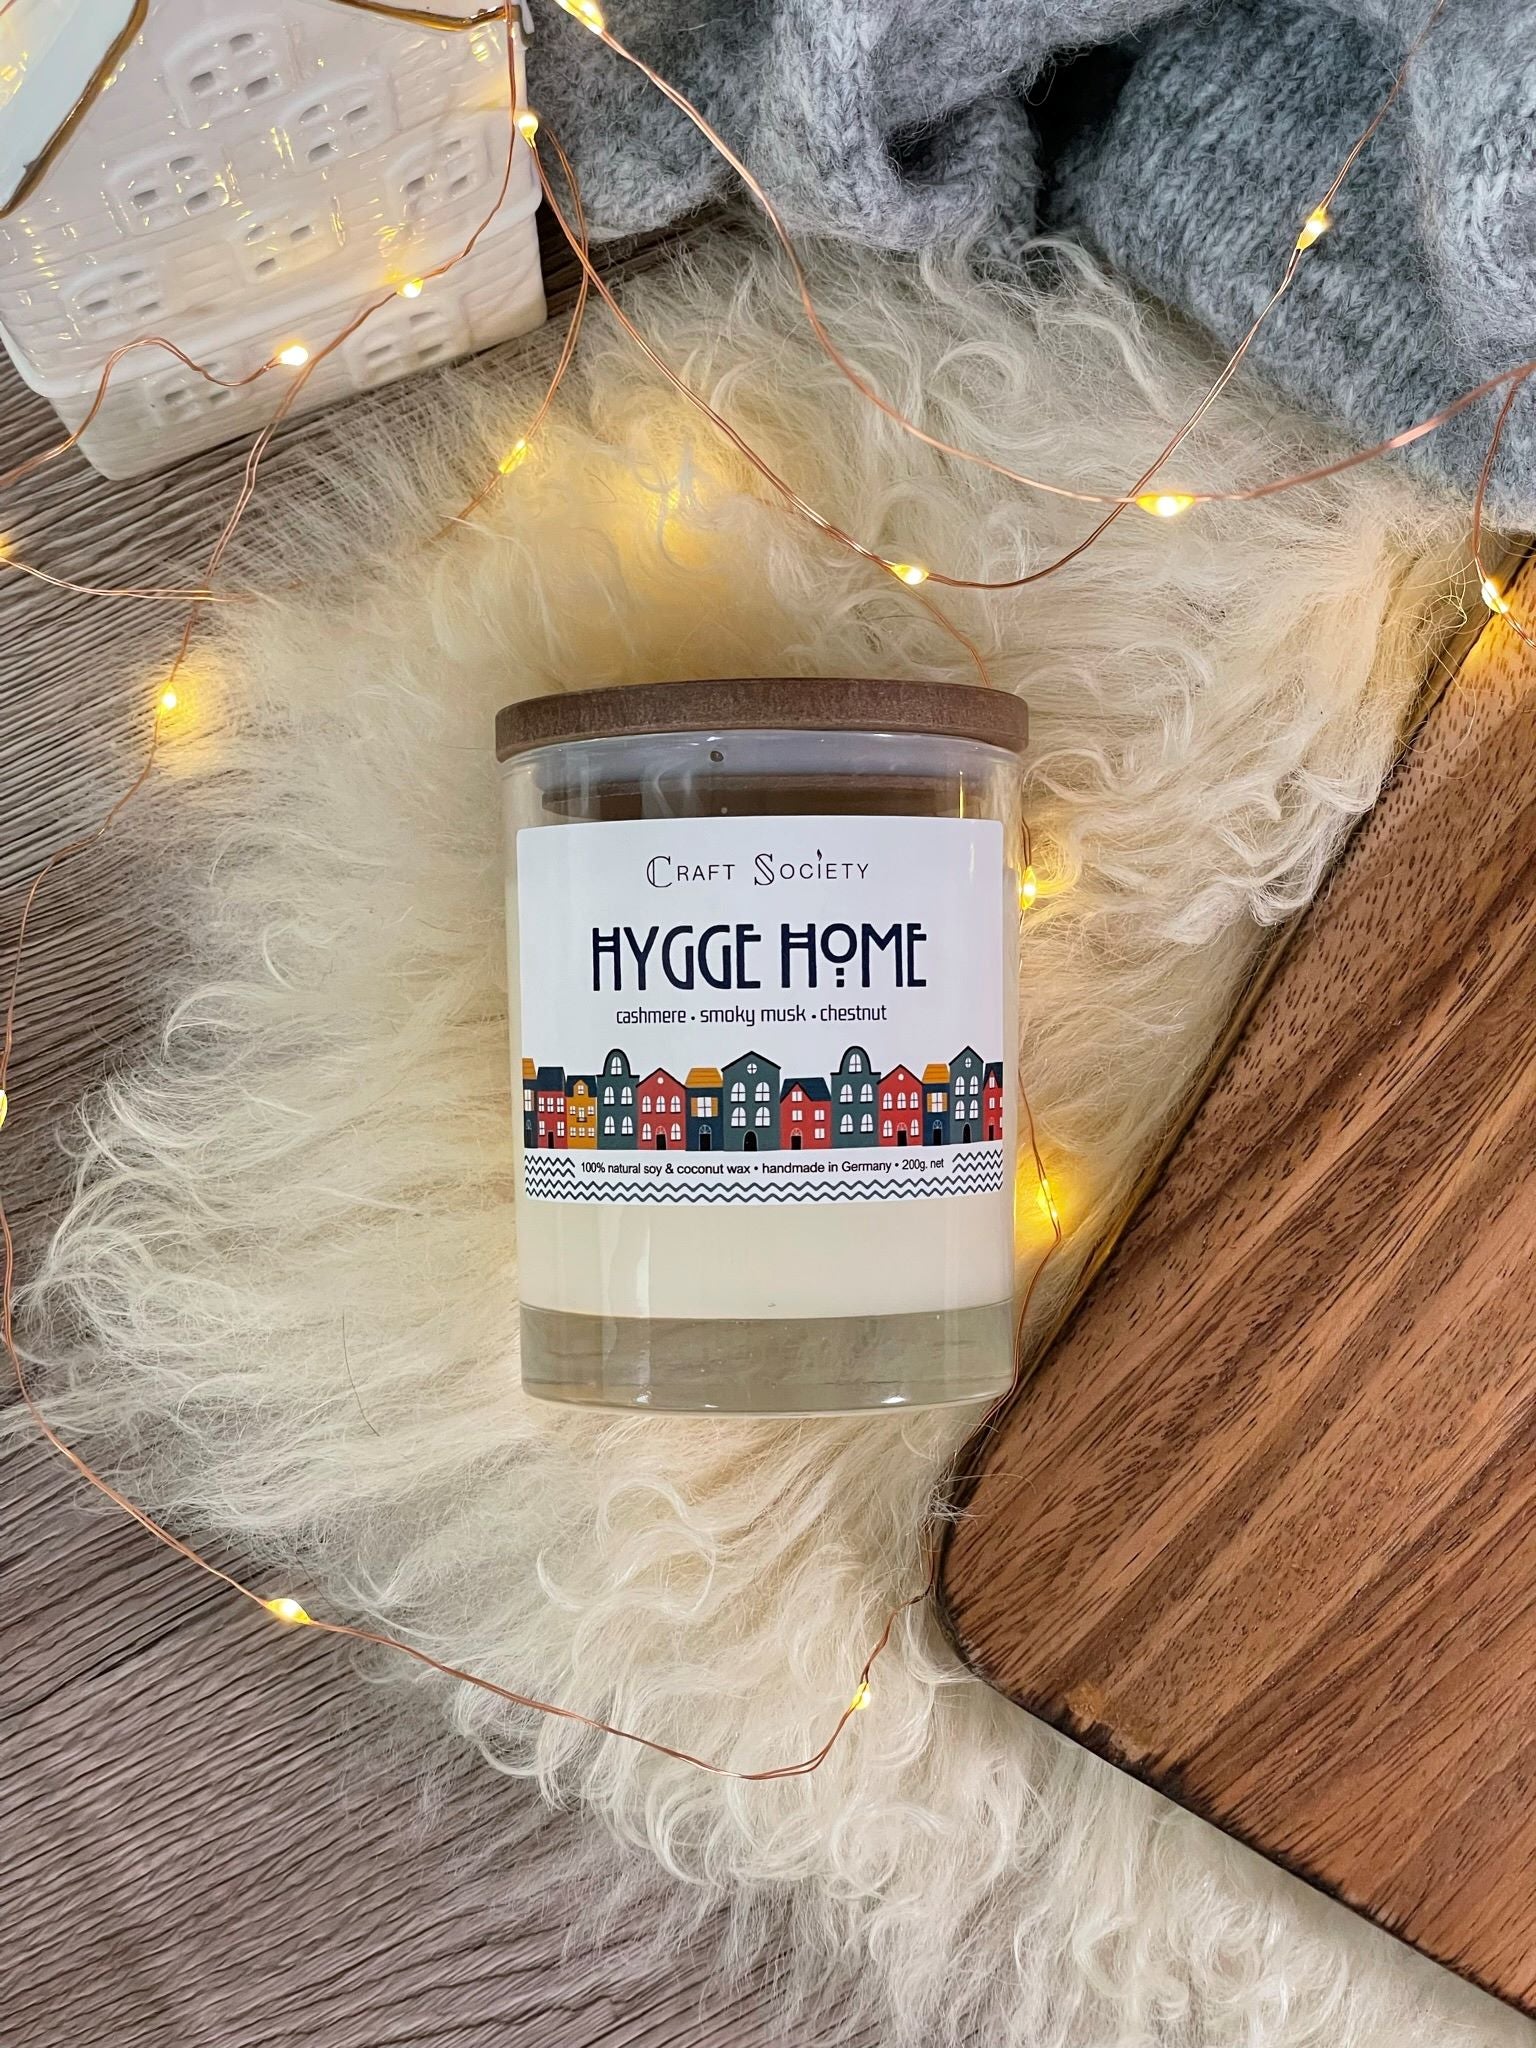 The Hygge Home scented candle with cotton wick from above on a festive background